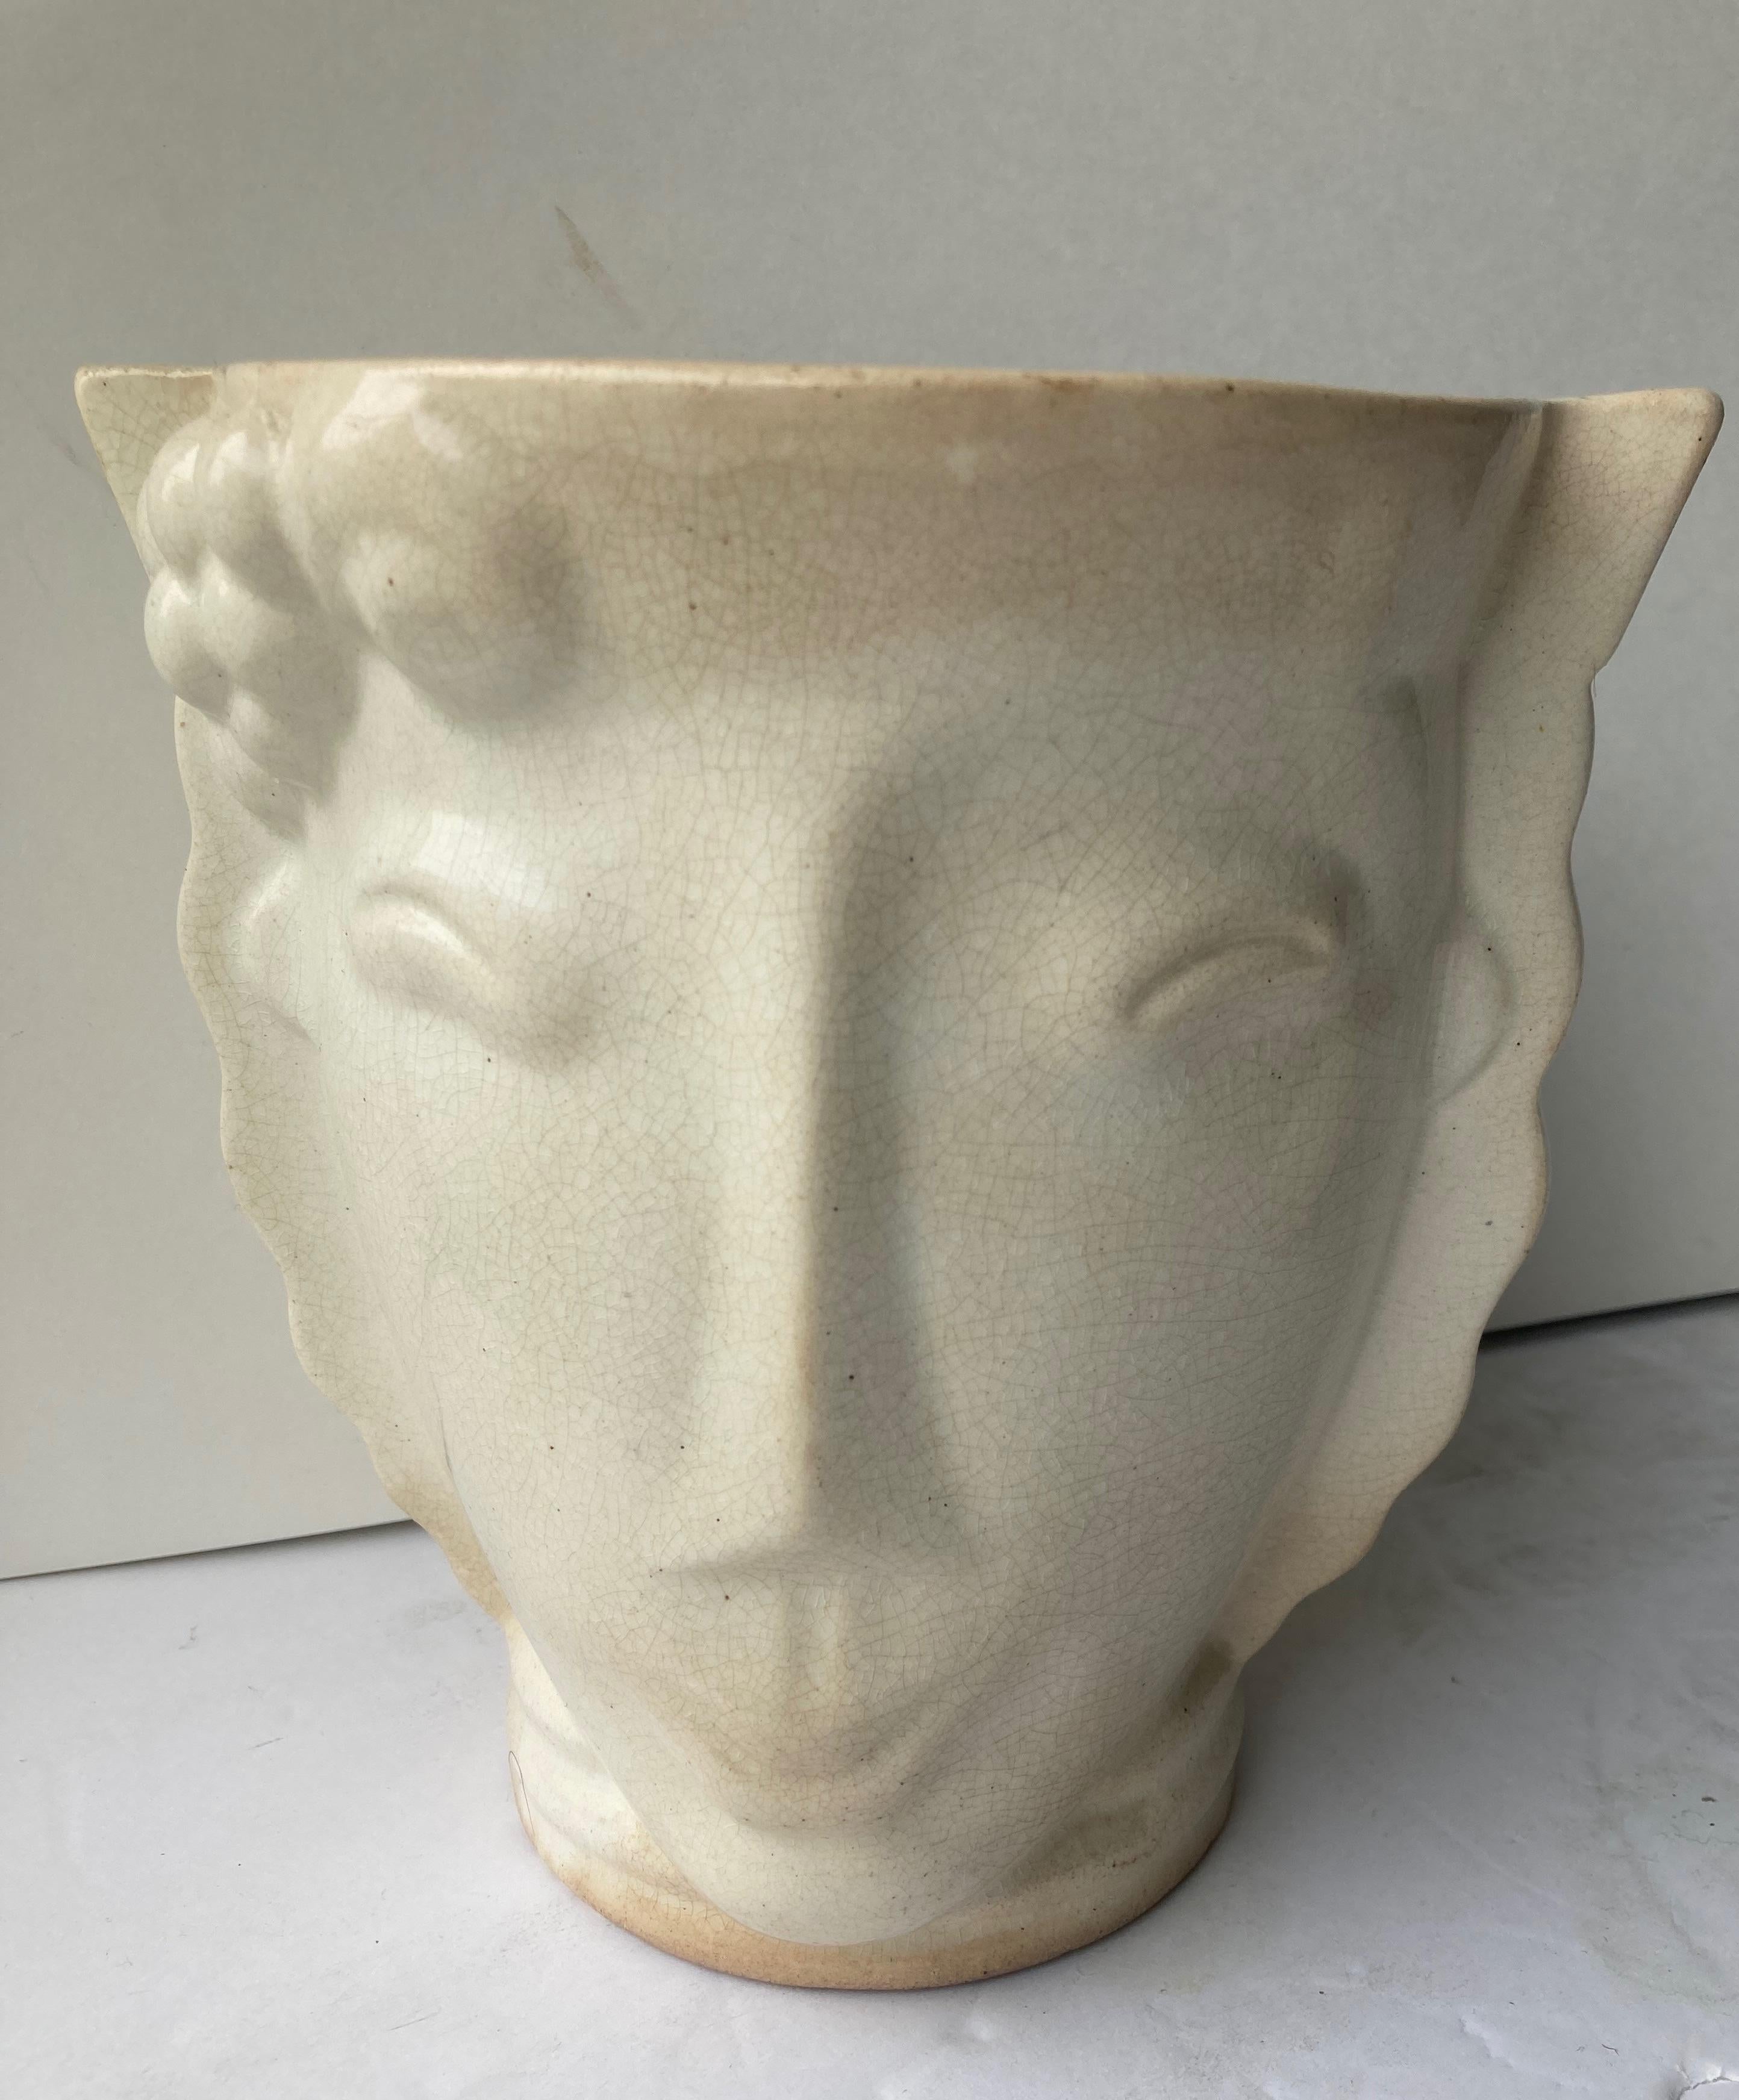 Madeline 'Madeleine' Sougez, Deco, Ceramic/Pottery Covered Jar, for Primavera In Good Condition For Sale In Los Angeles, CA